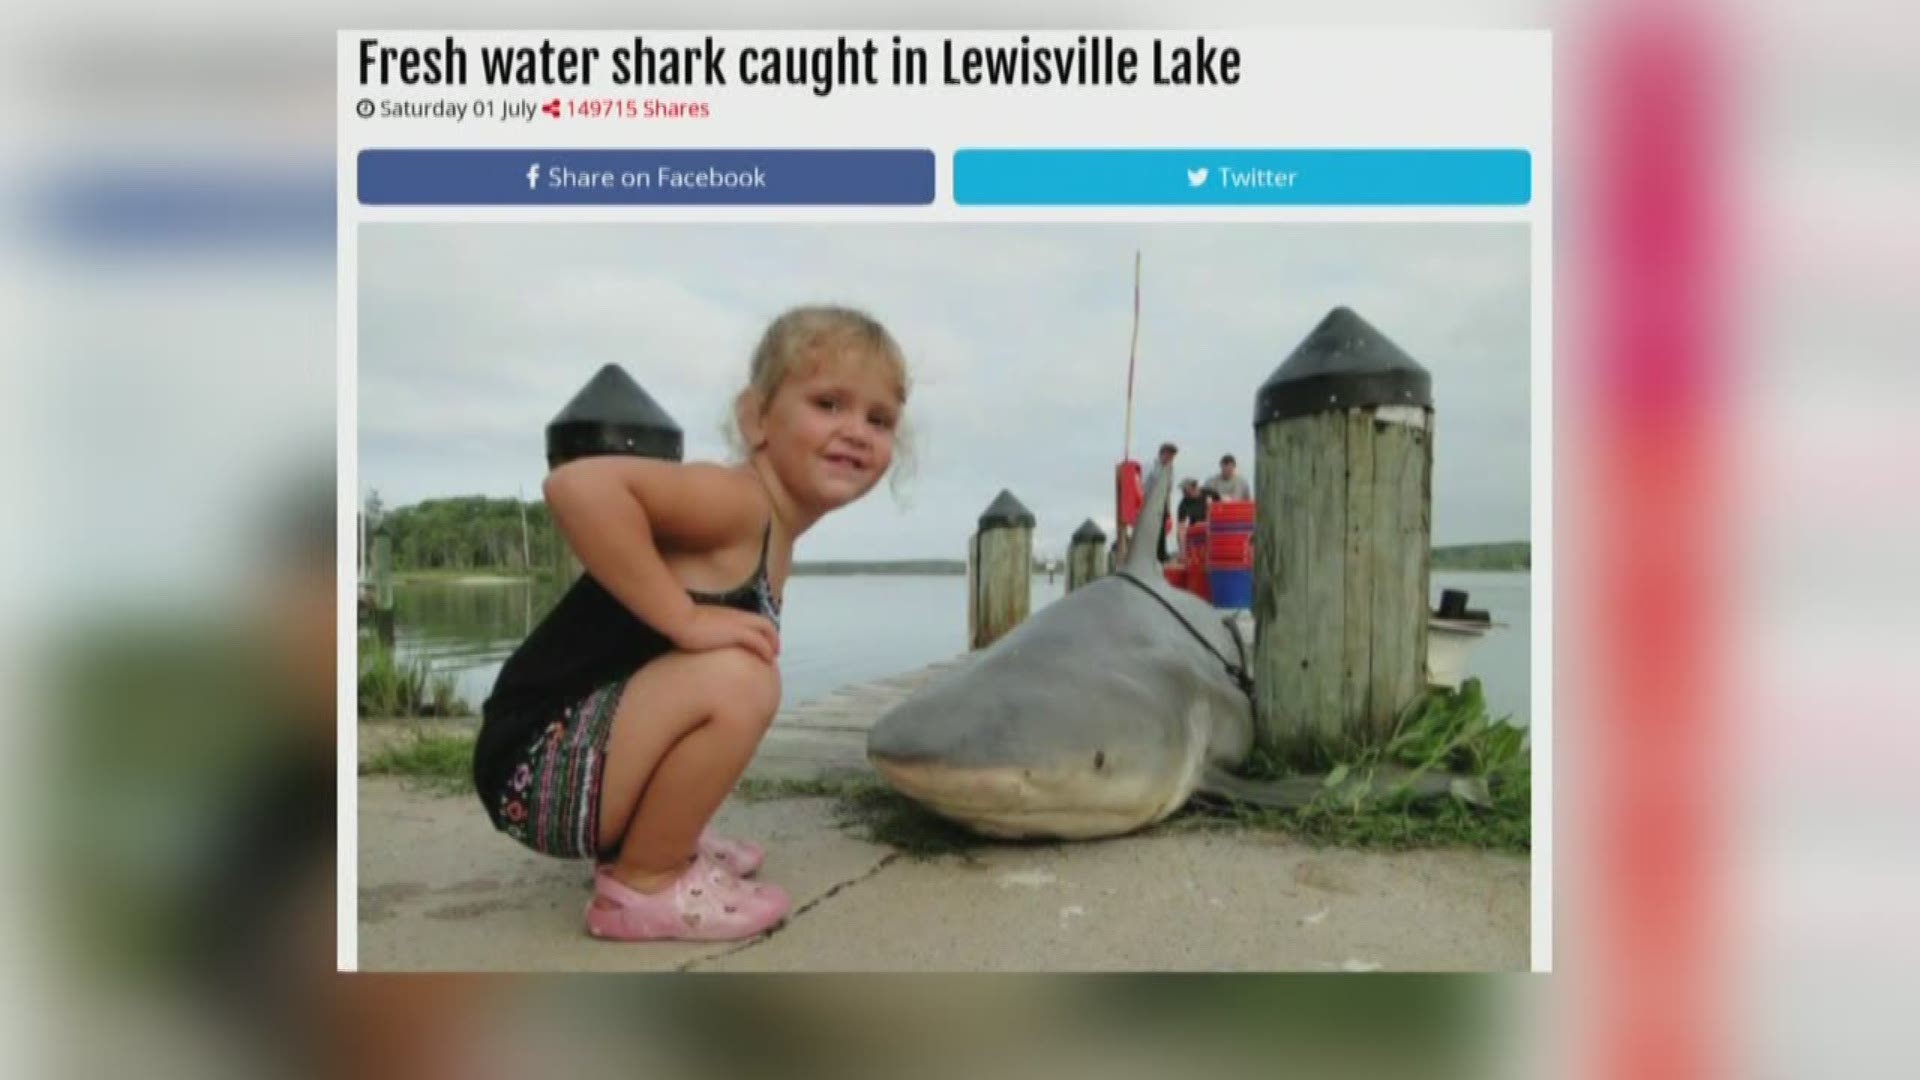 Verify: A shark caught in Lewisville lake?